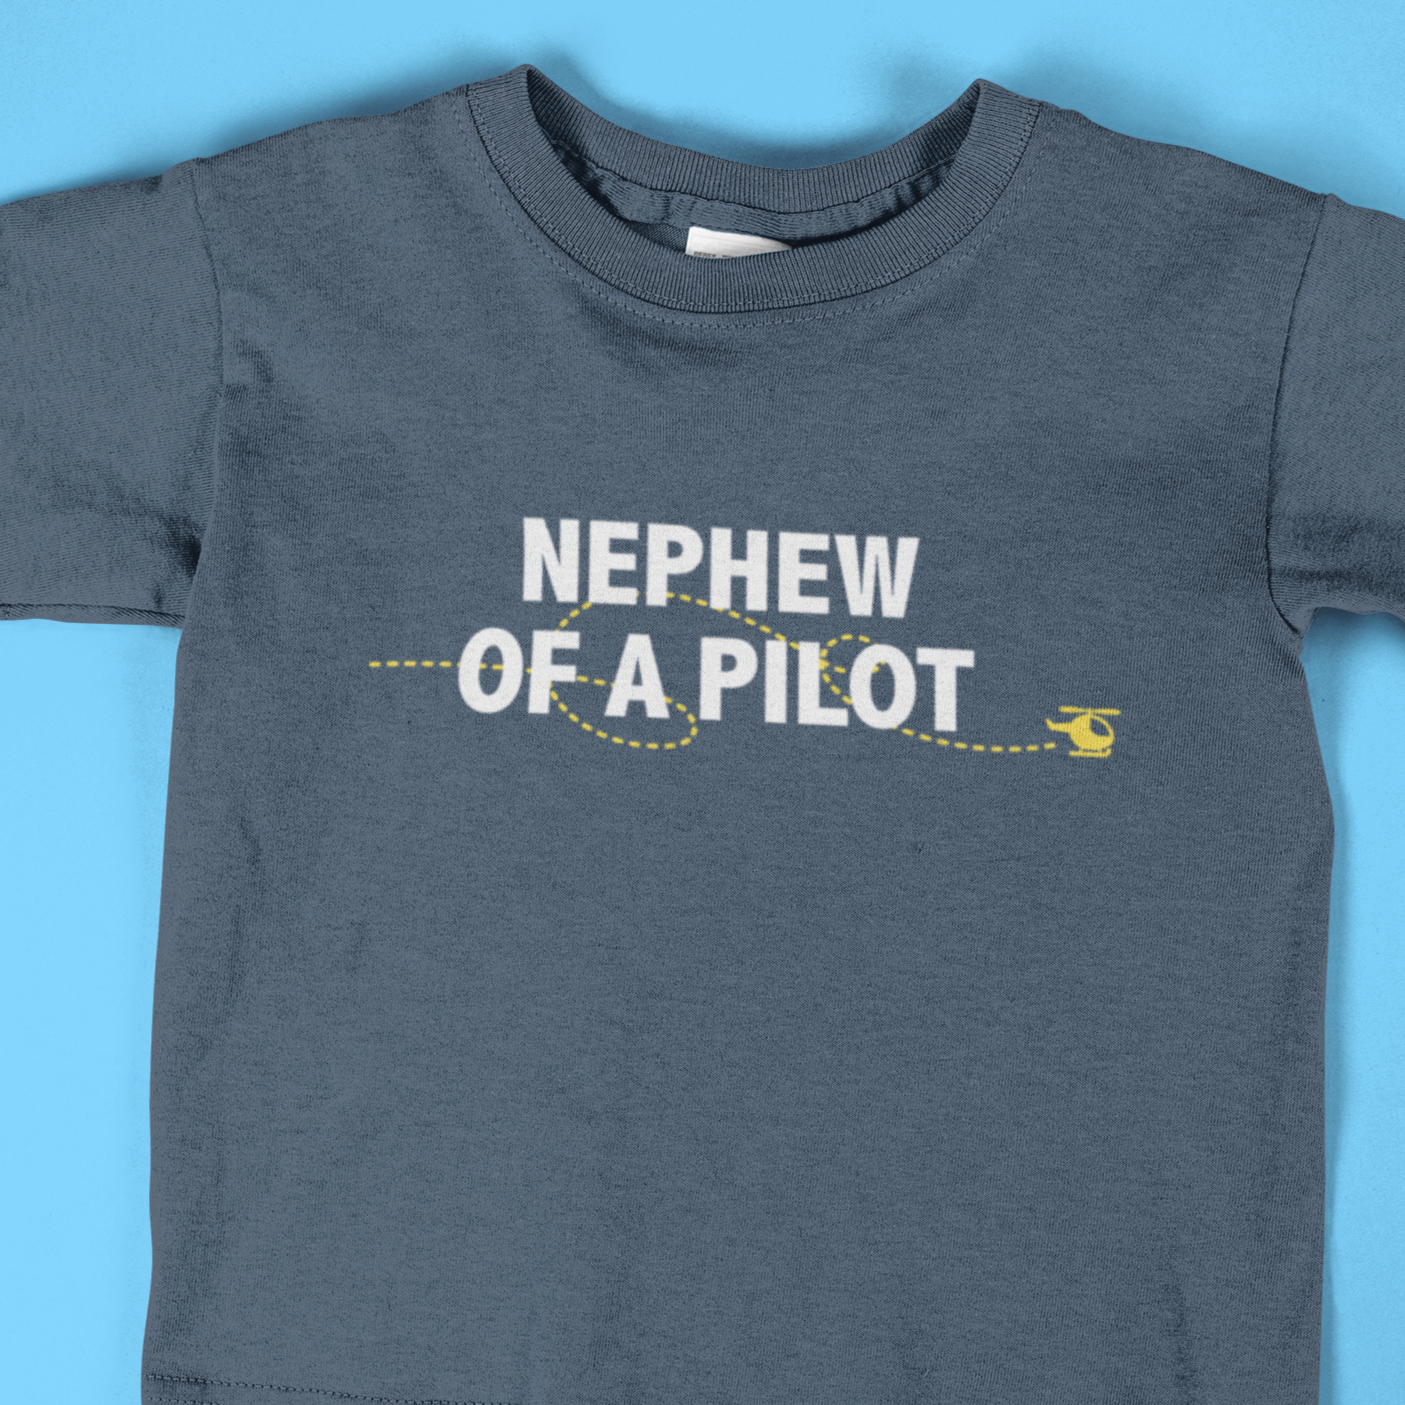 Nephew of the/a Pilot - Baby & Toddler T-shirts